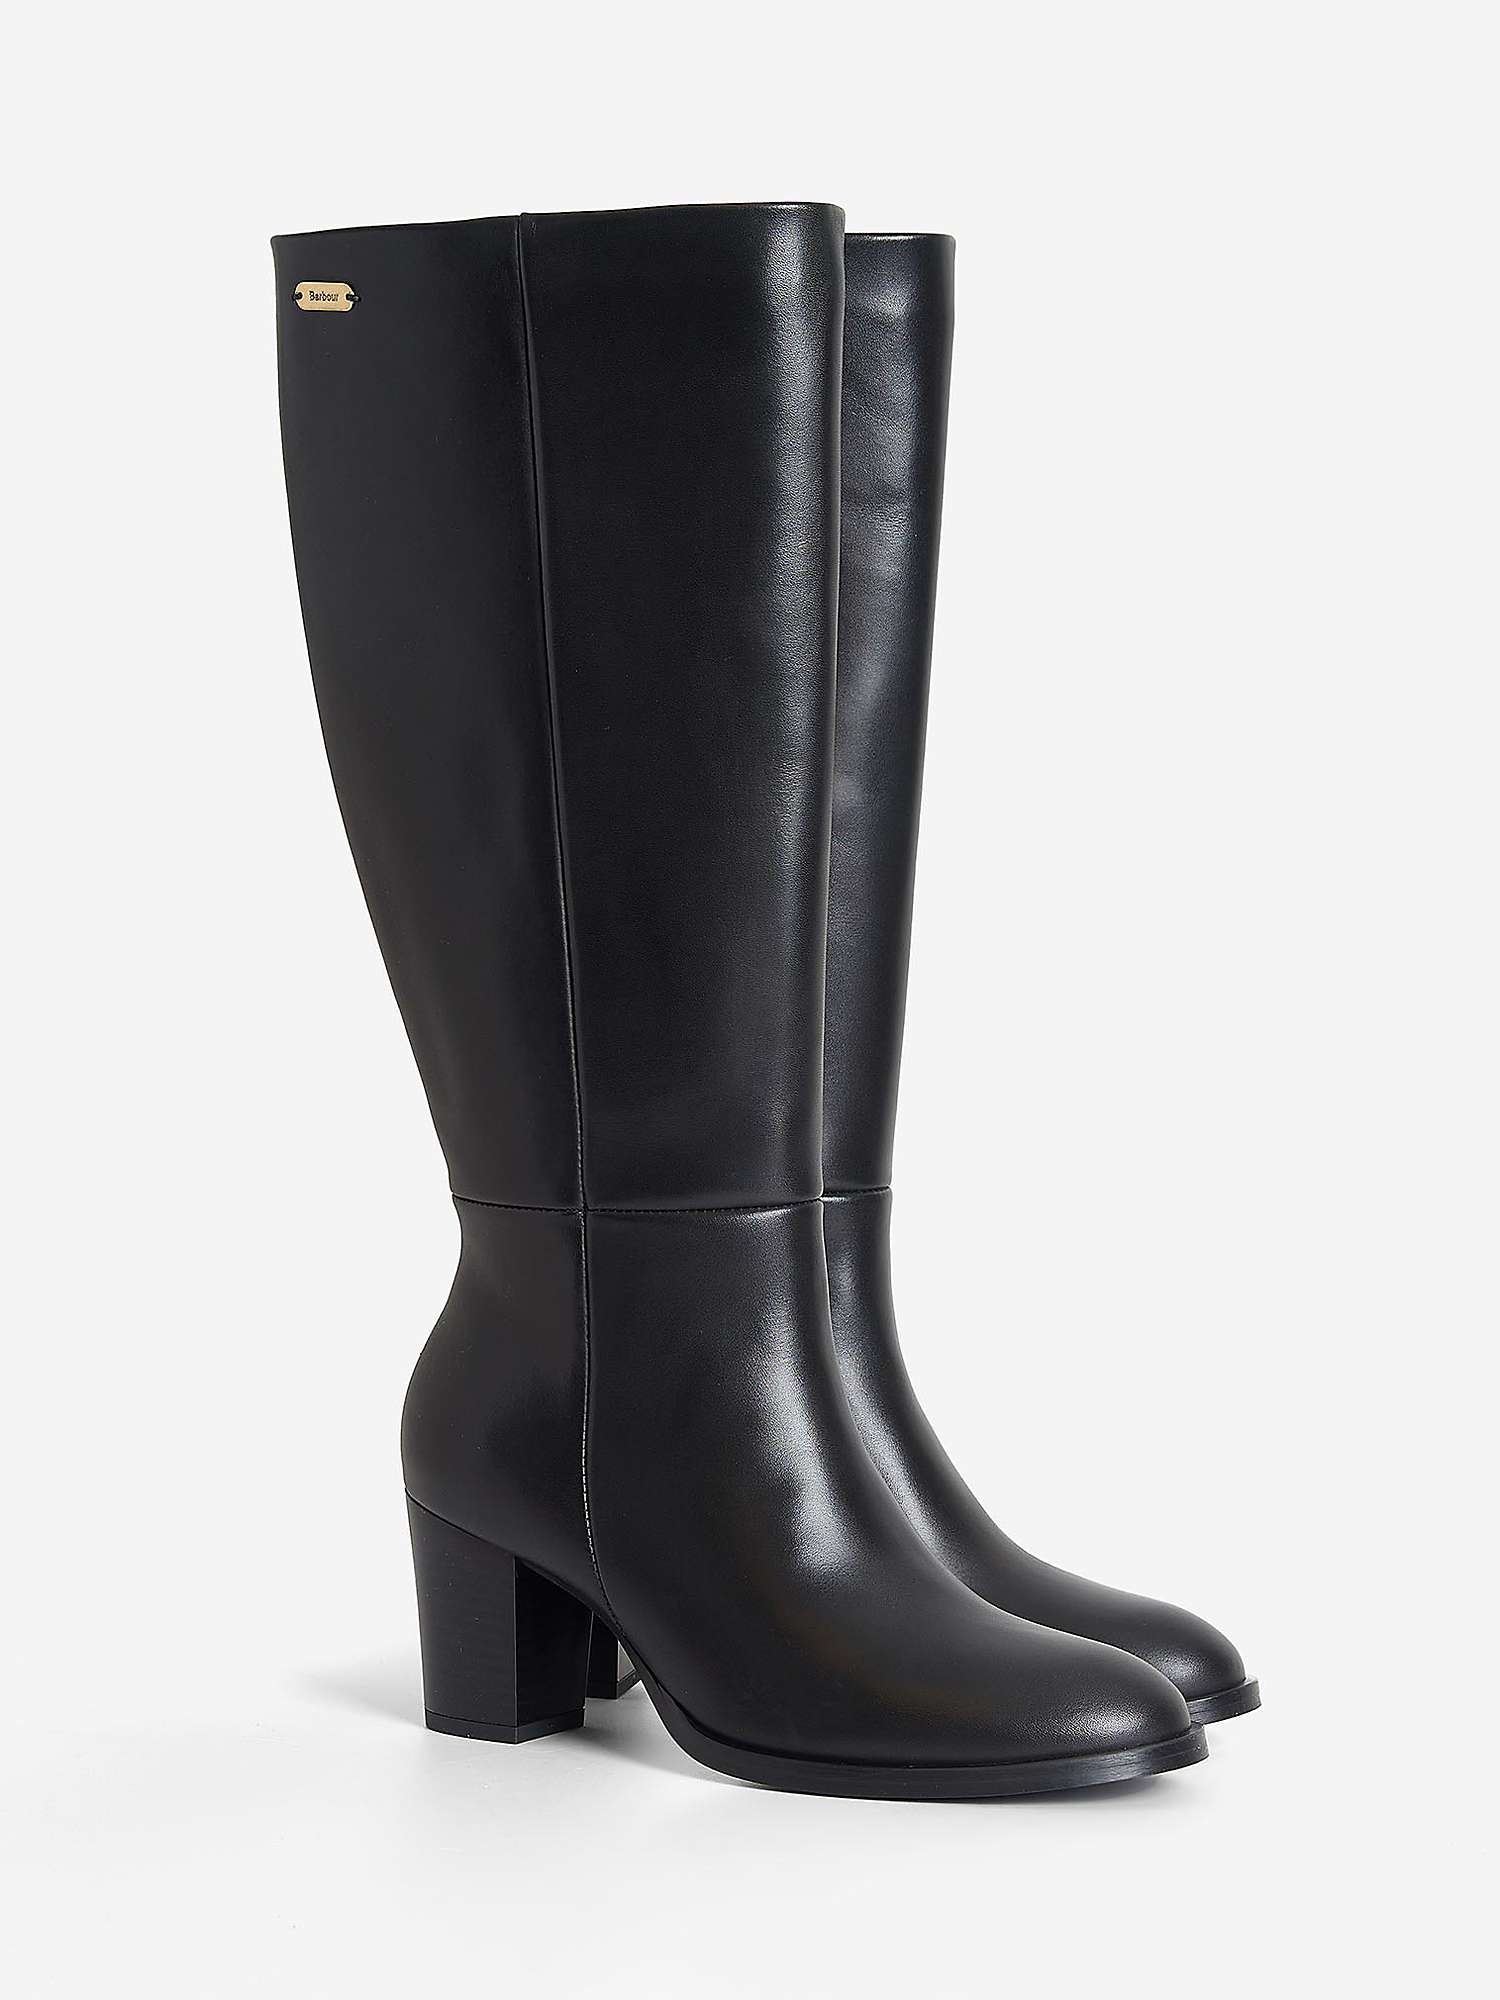 Buy Barbour Gloria Leather Knee High Boots, Black Online at johnlewis.com